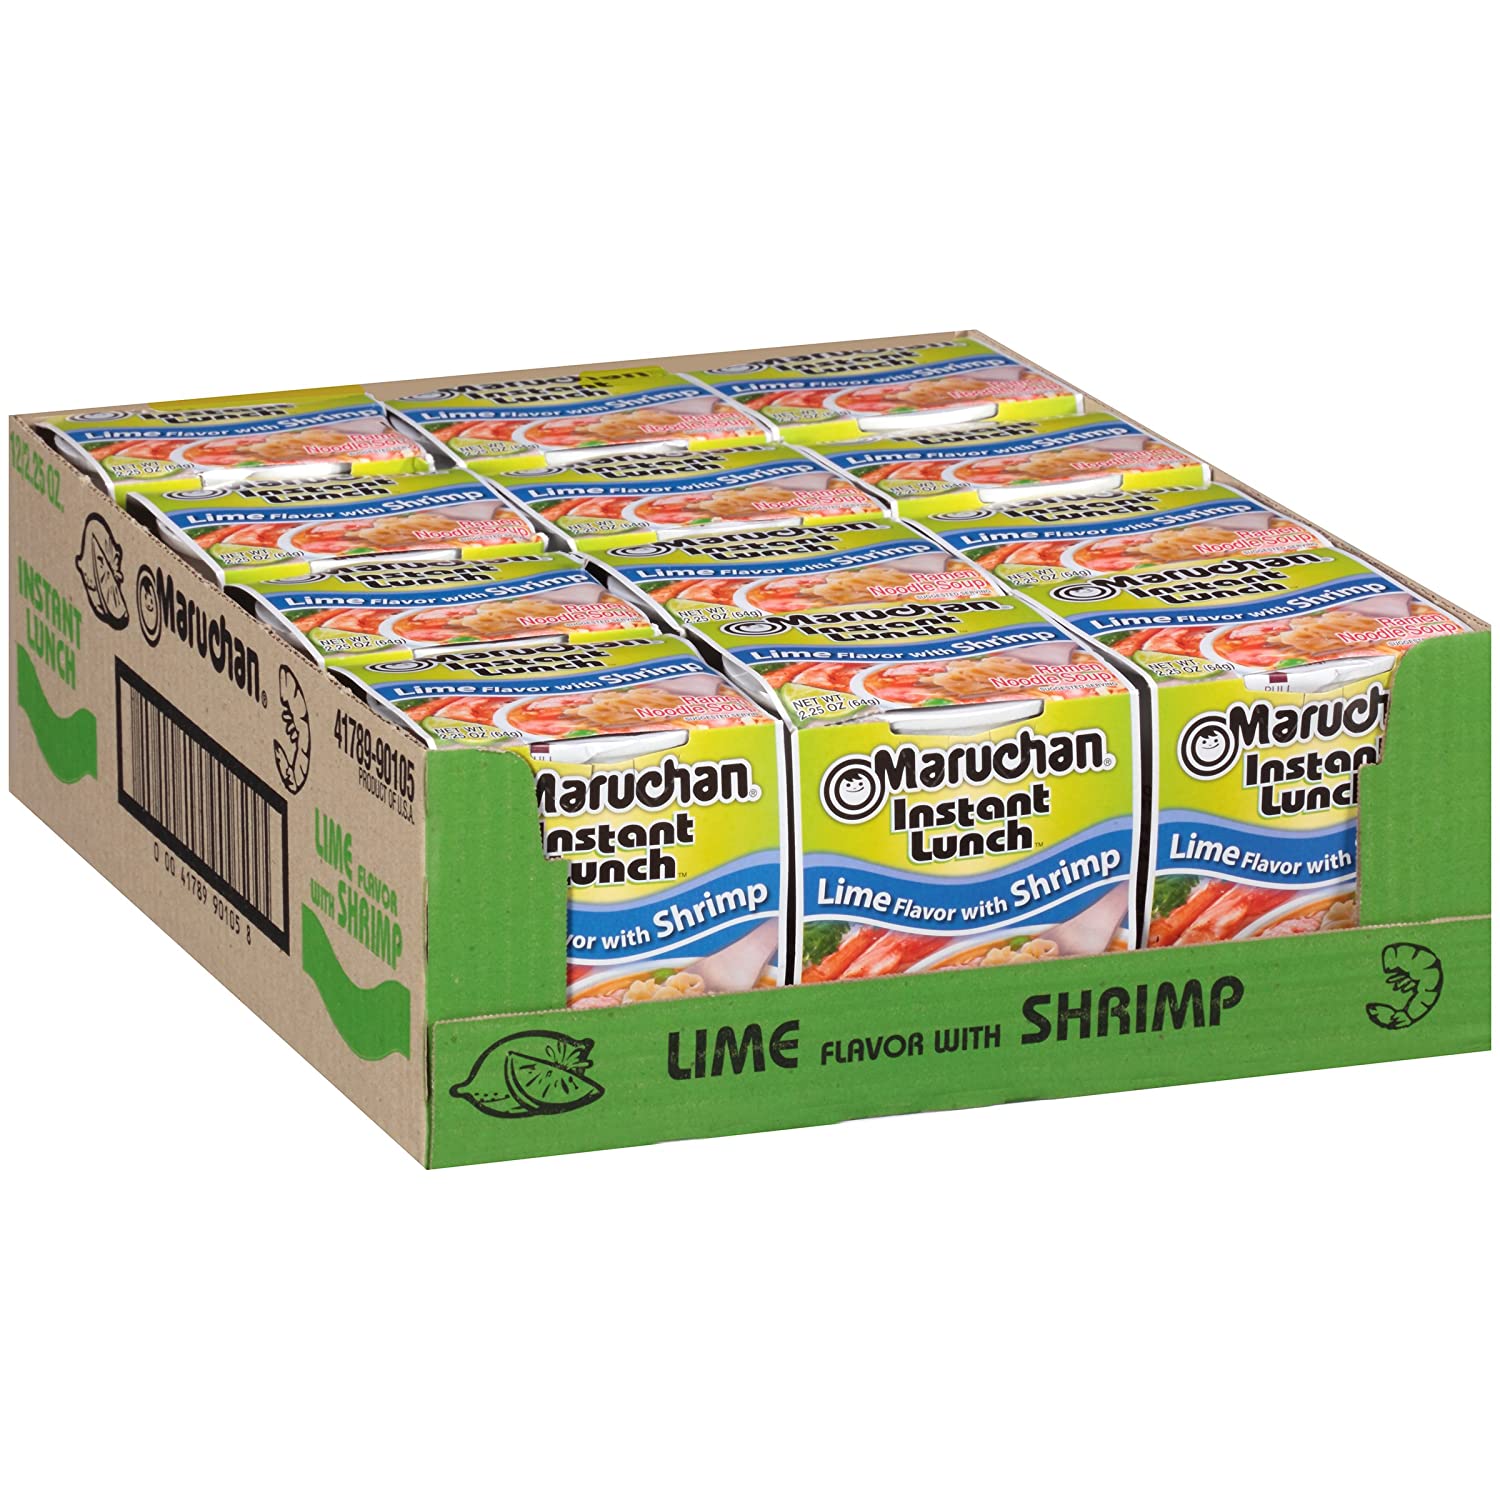 12-Pack 2.25-Oz Maruchan Instant Lunch Ramen Noodles (Lime w/ Shrimp) $4.44 + Free Shipping w/ Prime or on orders over $25